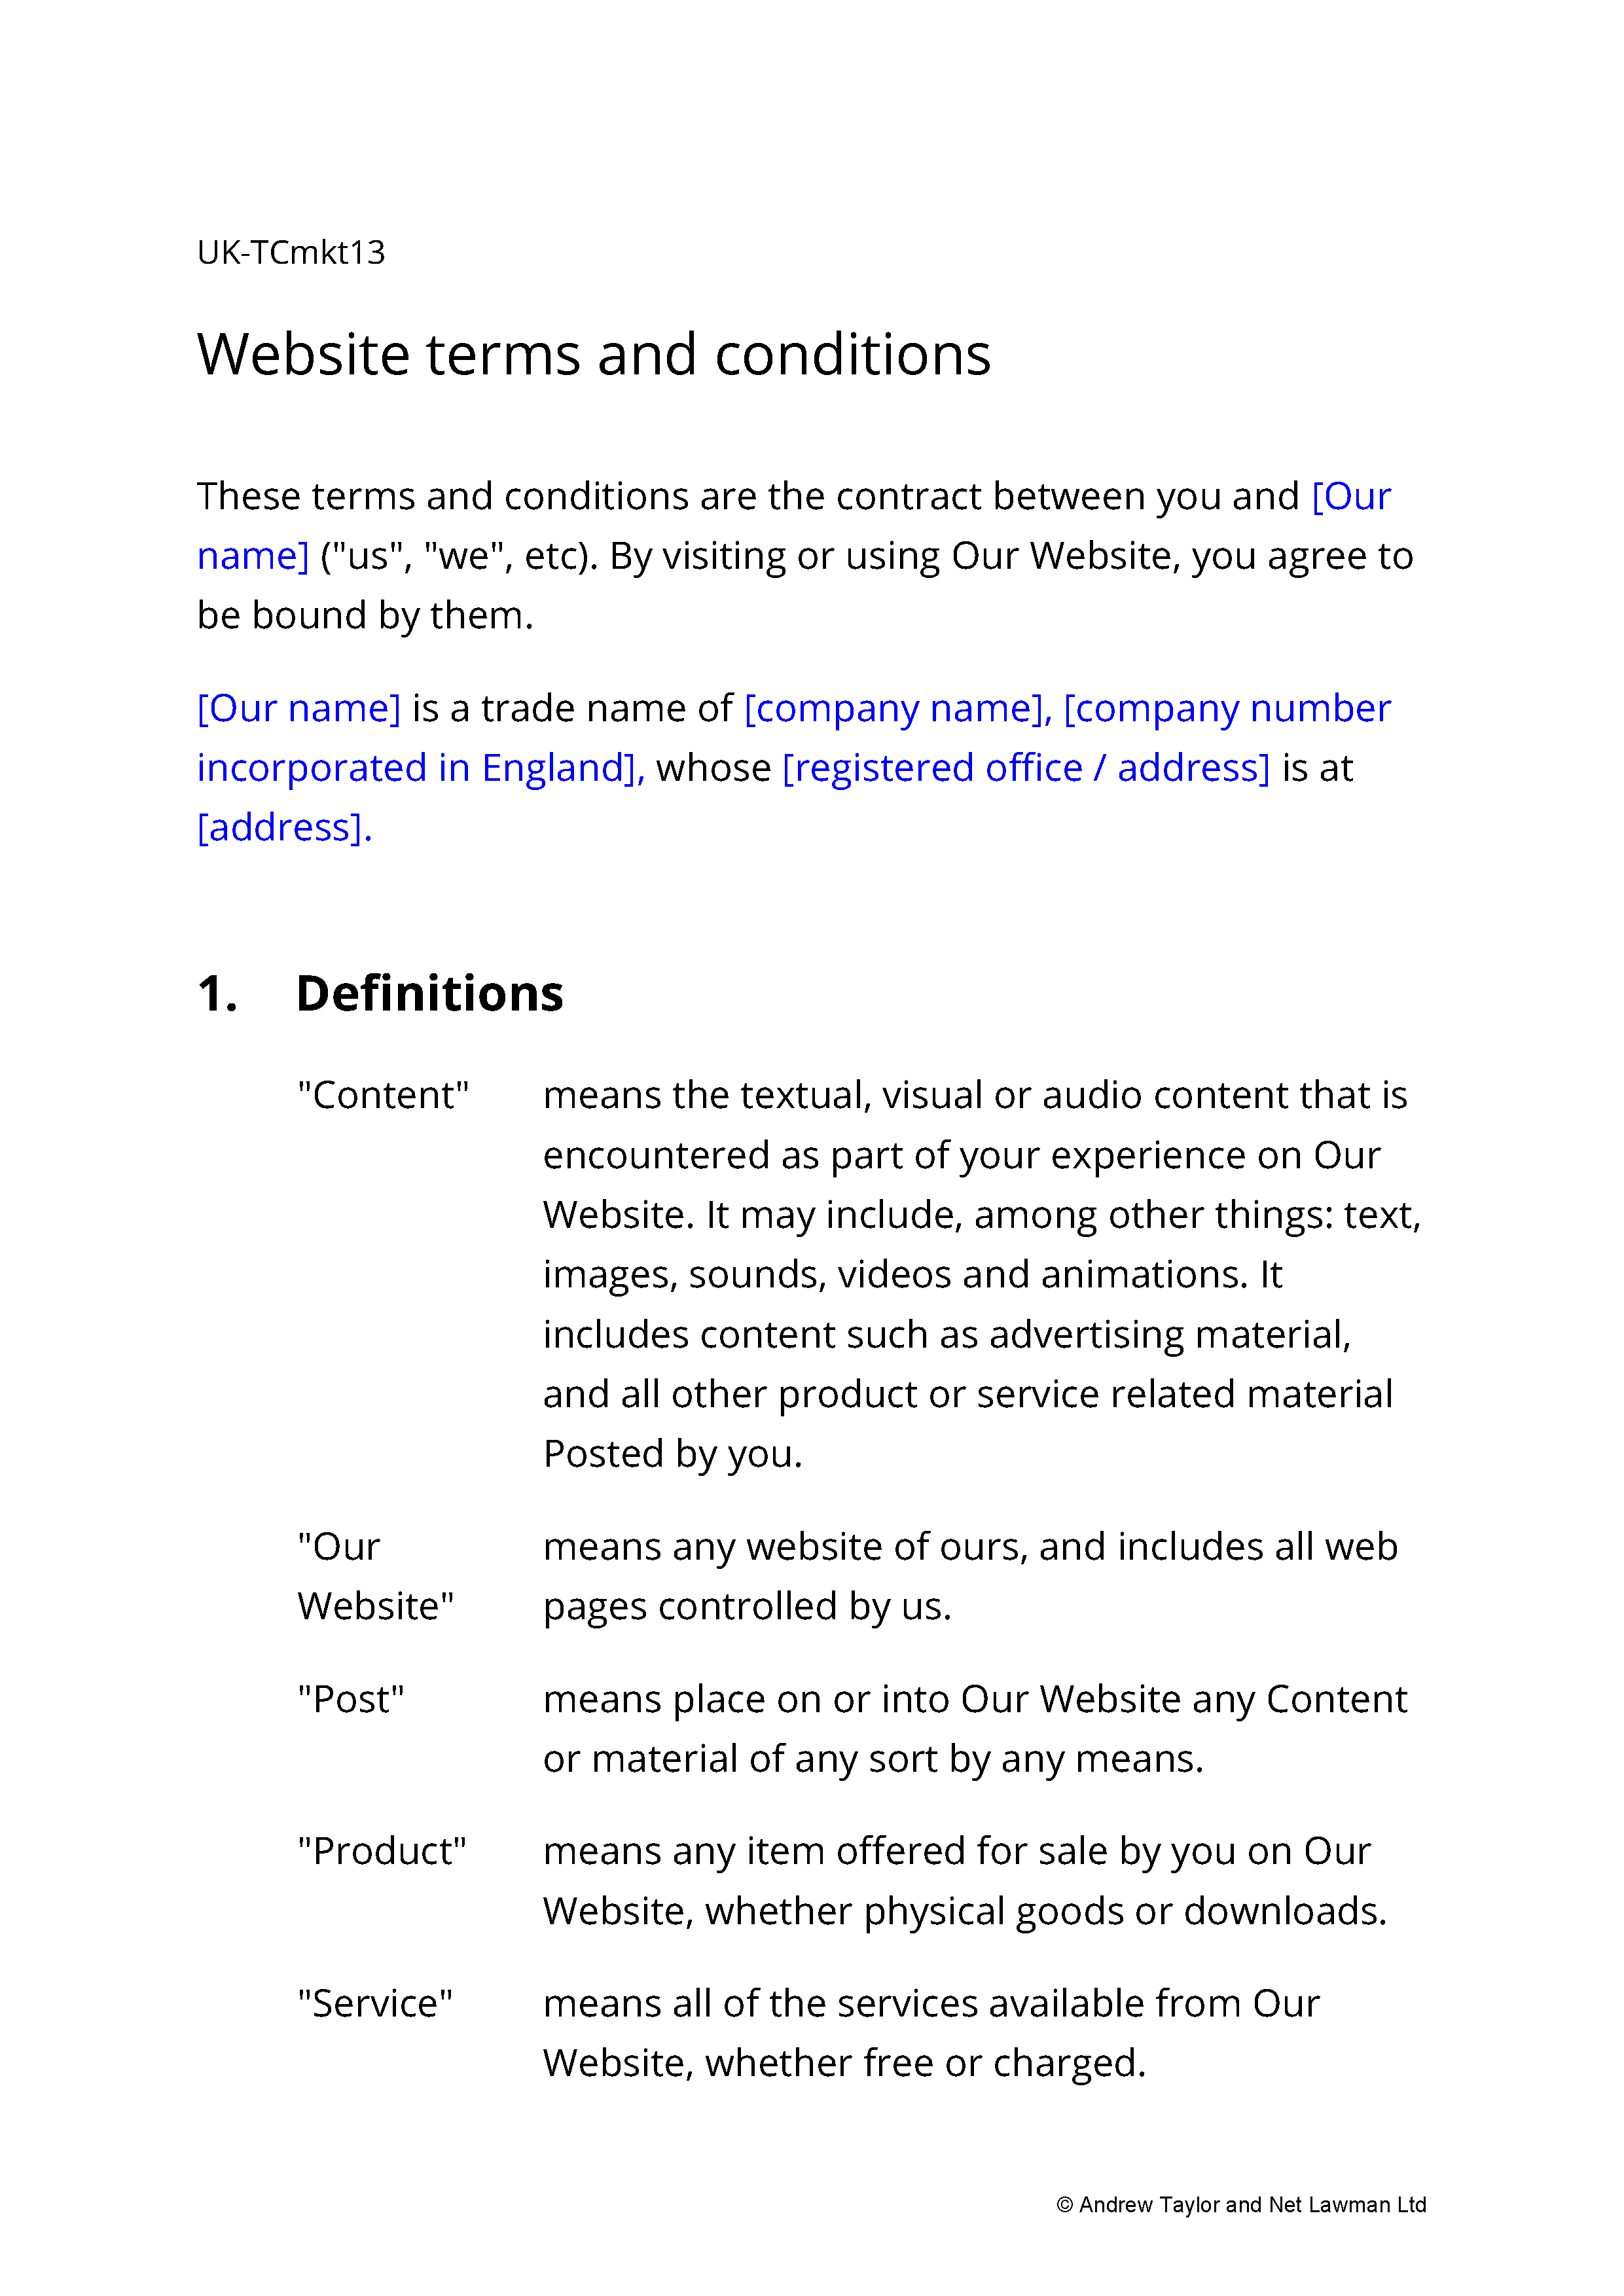 Sample page from the terms for a website B2B marketplace for goods